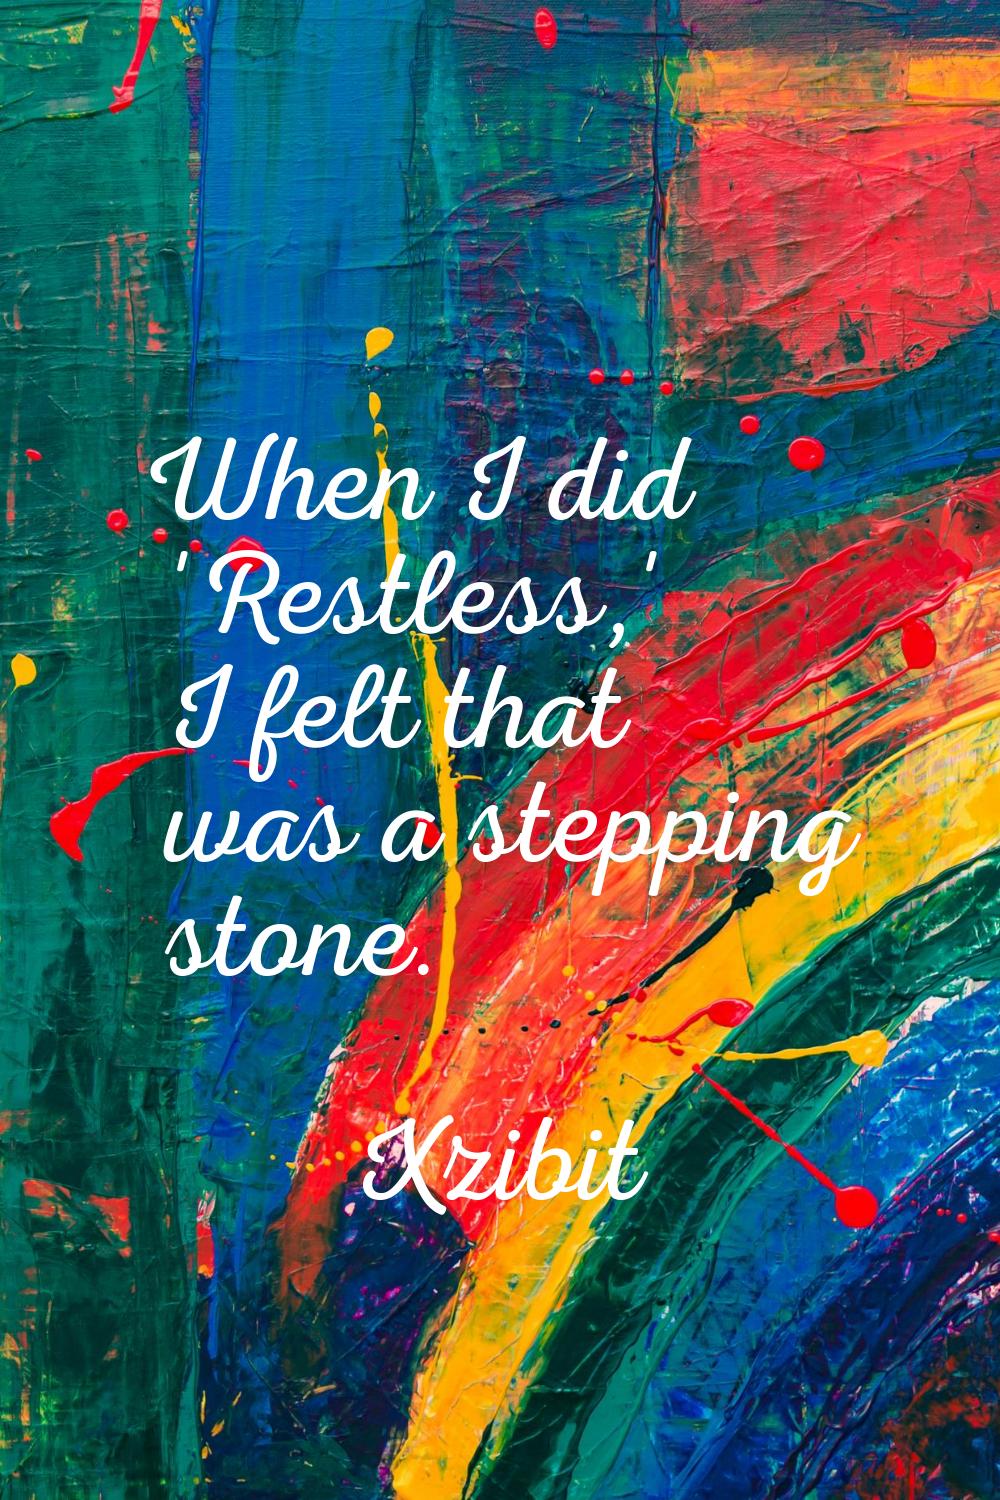 When I did 'Restless,' I felt that was a stepping stone.